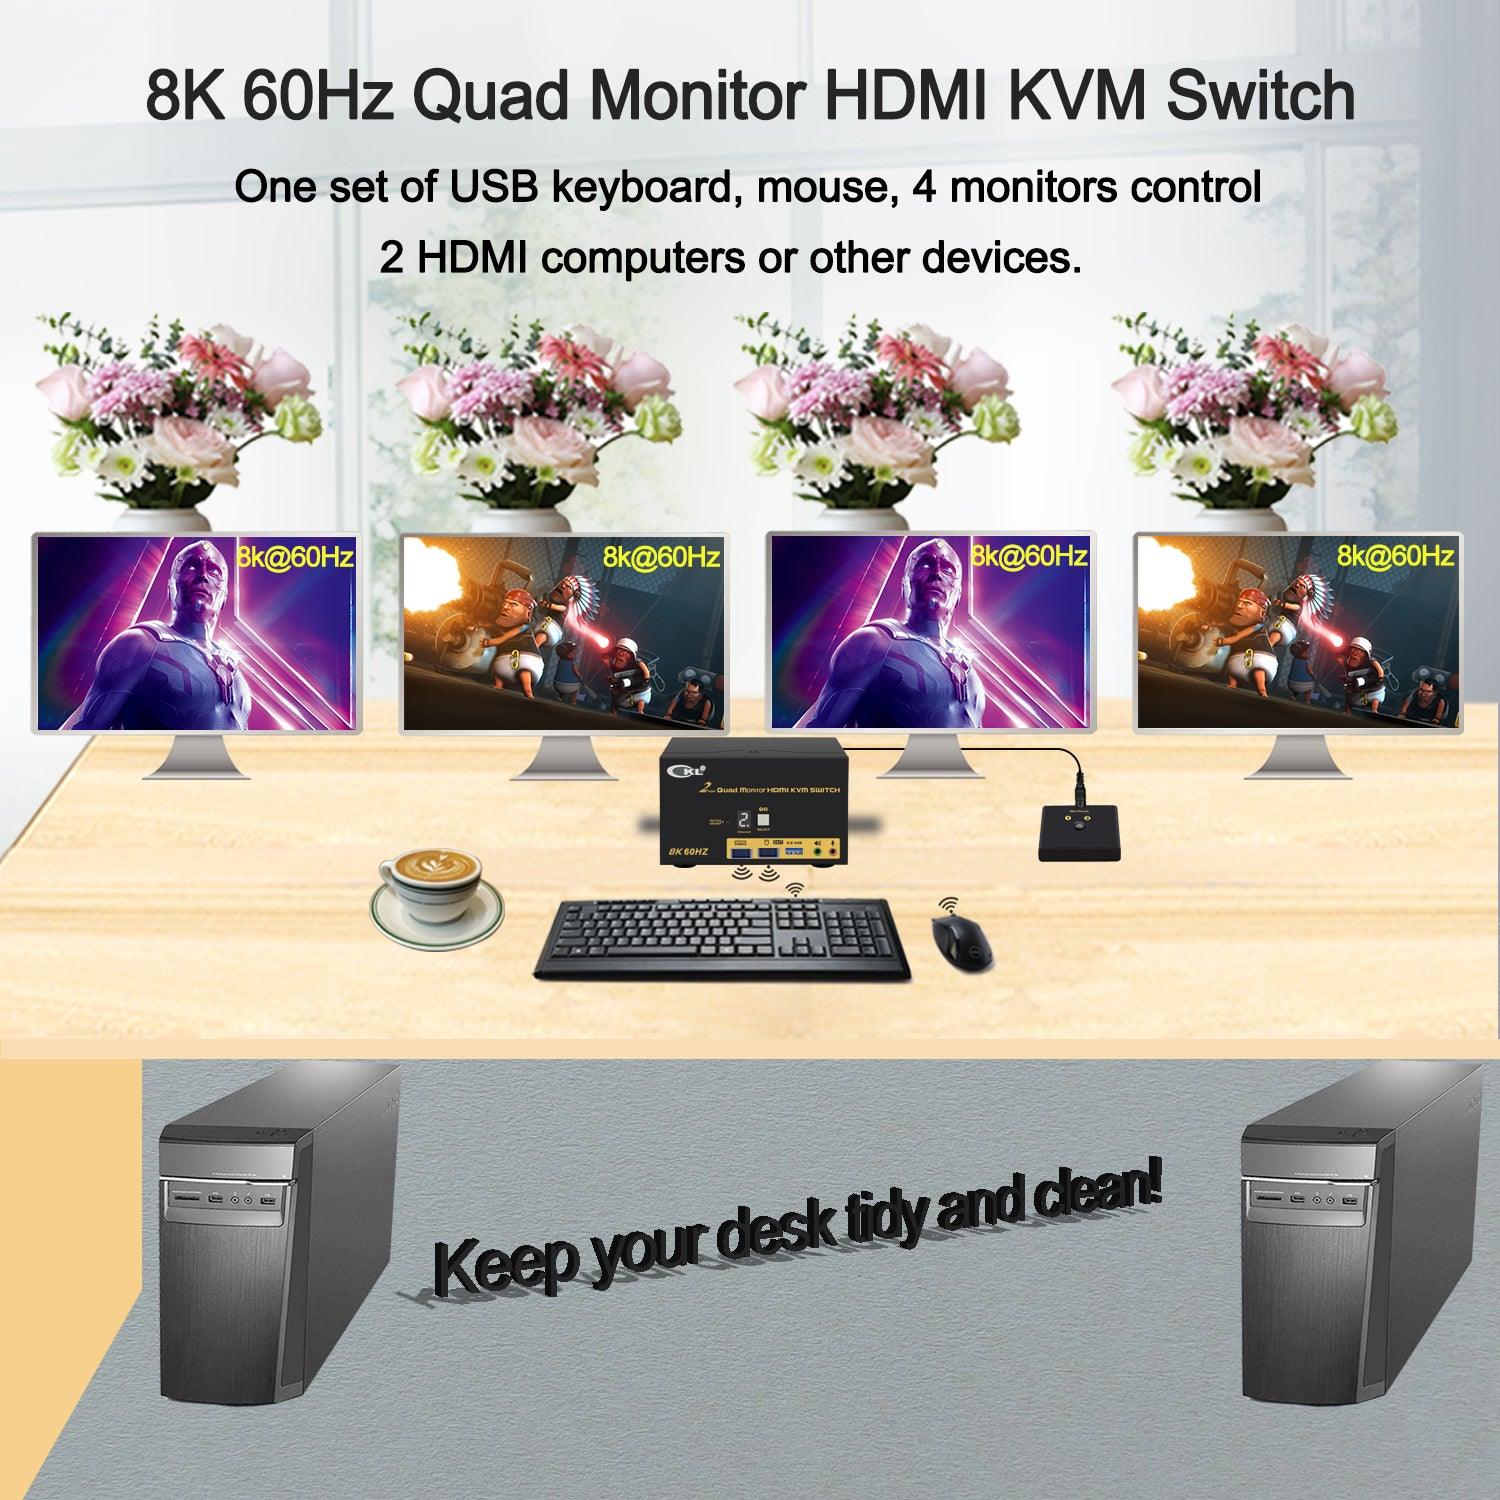 CKL 2 Port USB 3.0 KVM Switch Quad Monitor HDMI 2.1 8K 60Hz 4K 120Hz 144Hz with EDID, Keyboard Video Mouse Peripherals Switcher for 2 Computers 4 Monitors with Cables and Audio (CKL-924HUA-5) - CKL KVM Switches